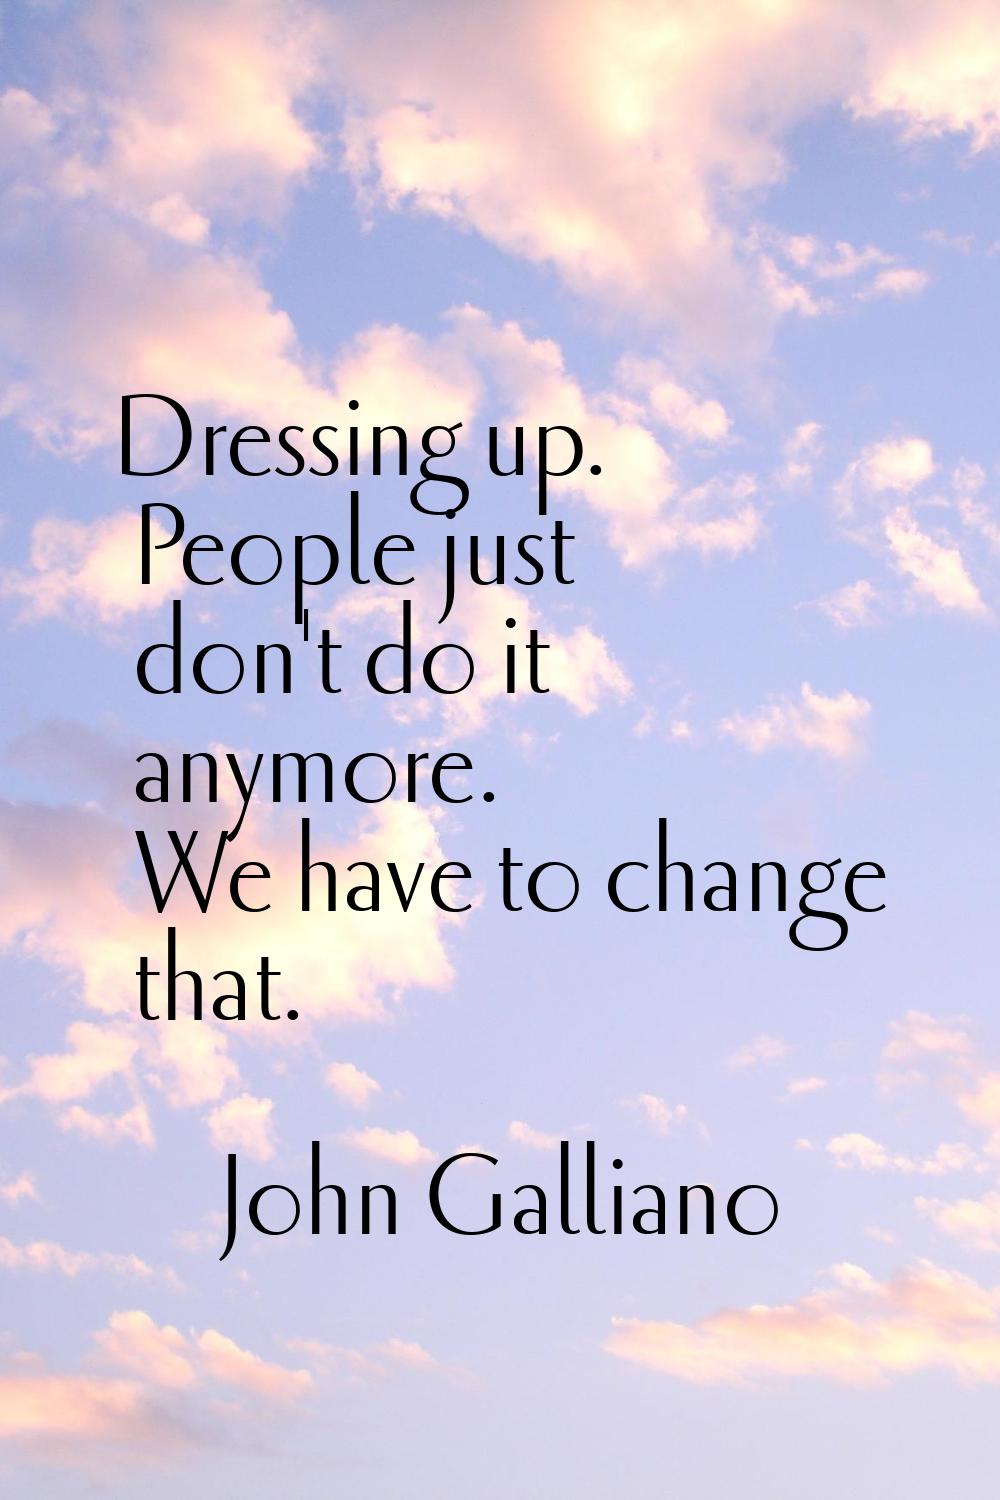 Dressing up. People just don't do it anymore. We have to change that.